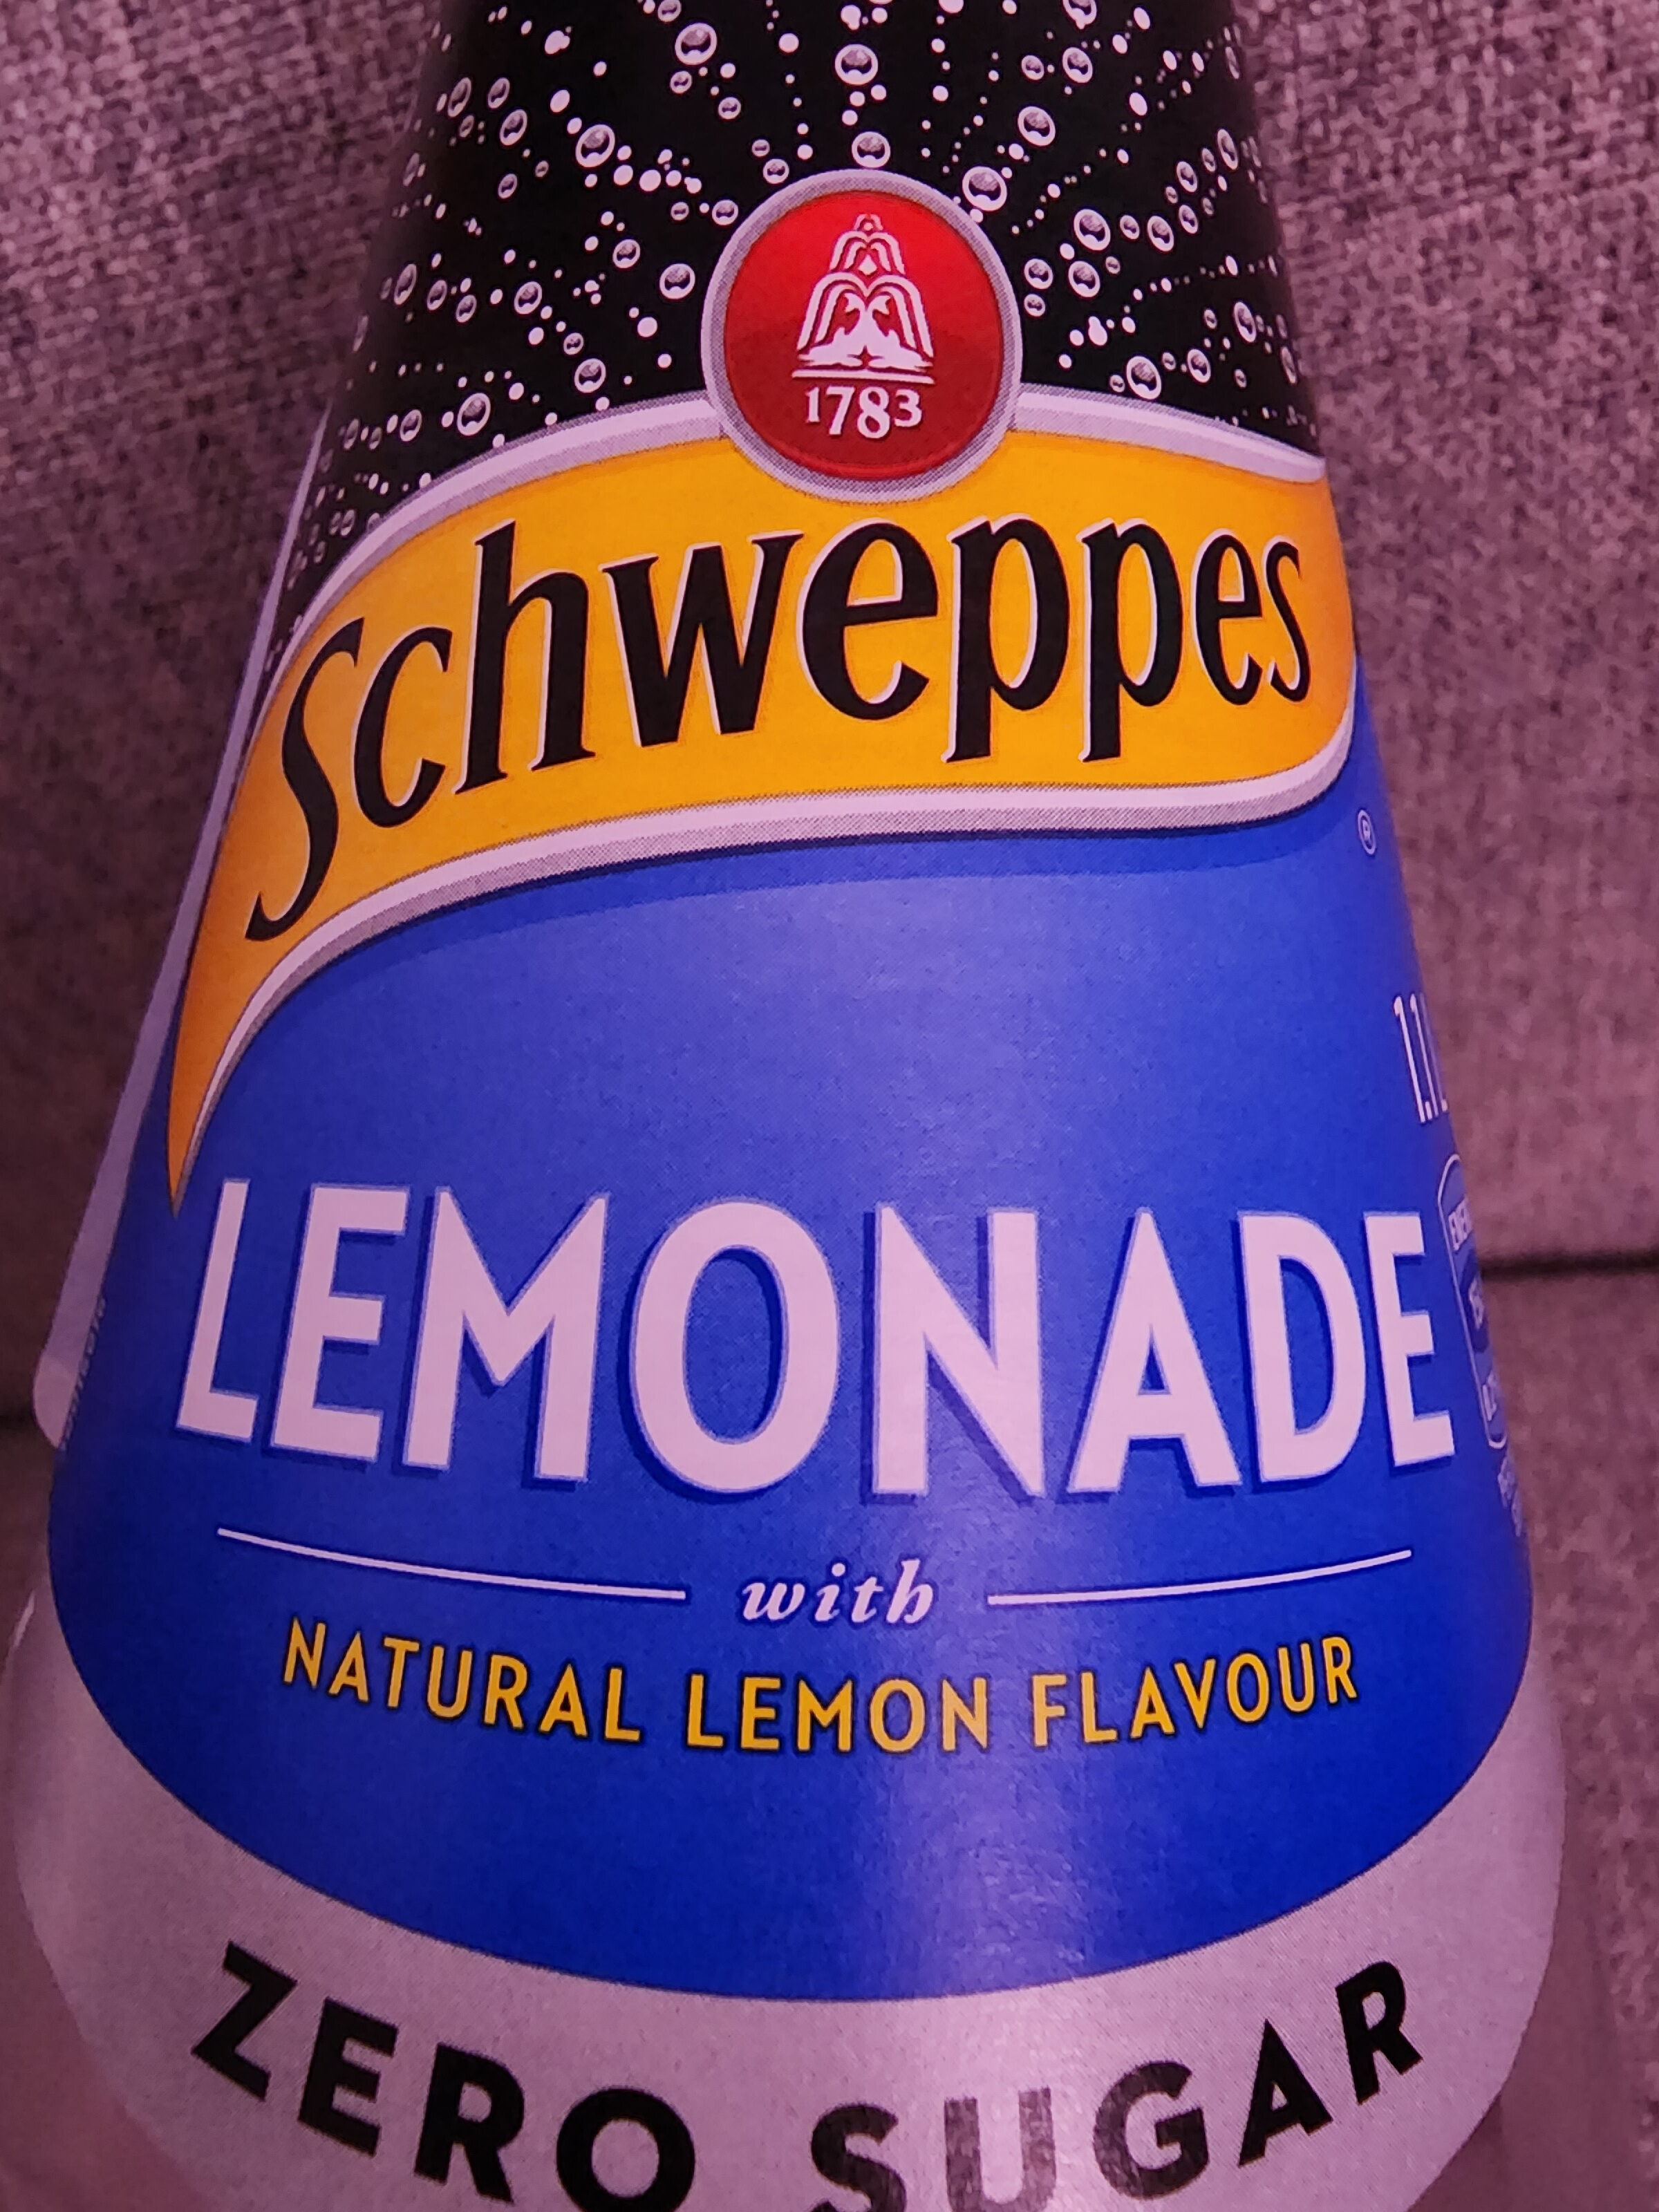 Lemonade Zero Sugar - Recycling instructions and/or packaging information